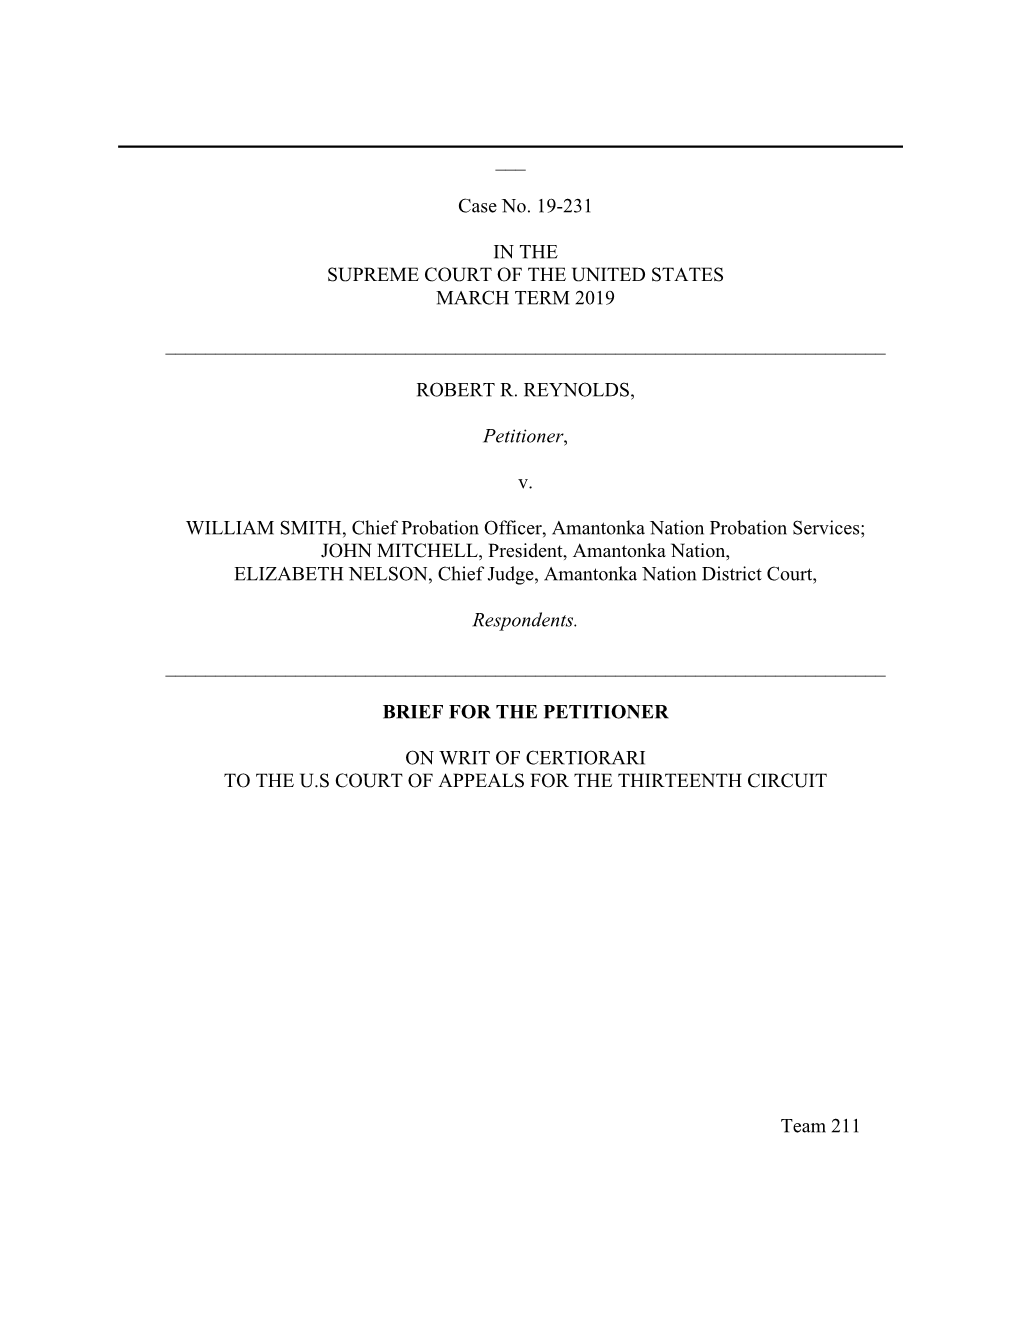 Case No. 19-231 in the SUPREME COURT of the UNITED STATES